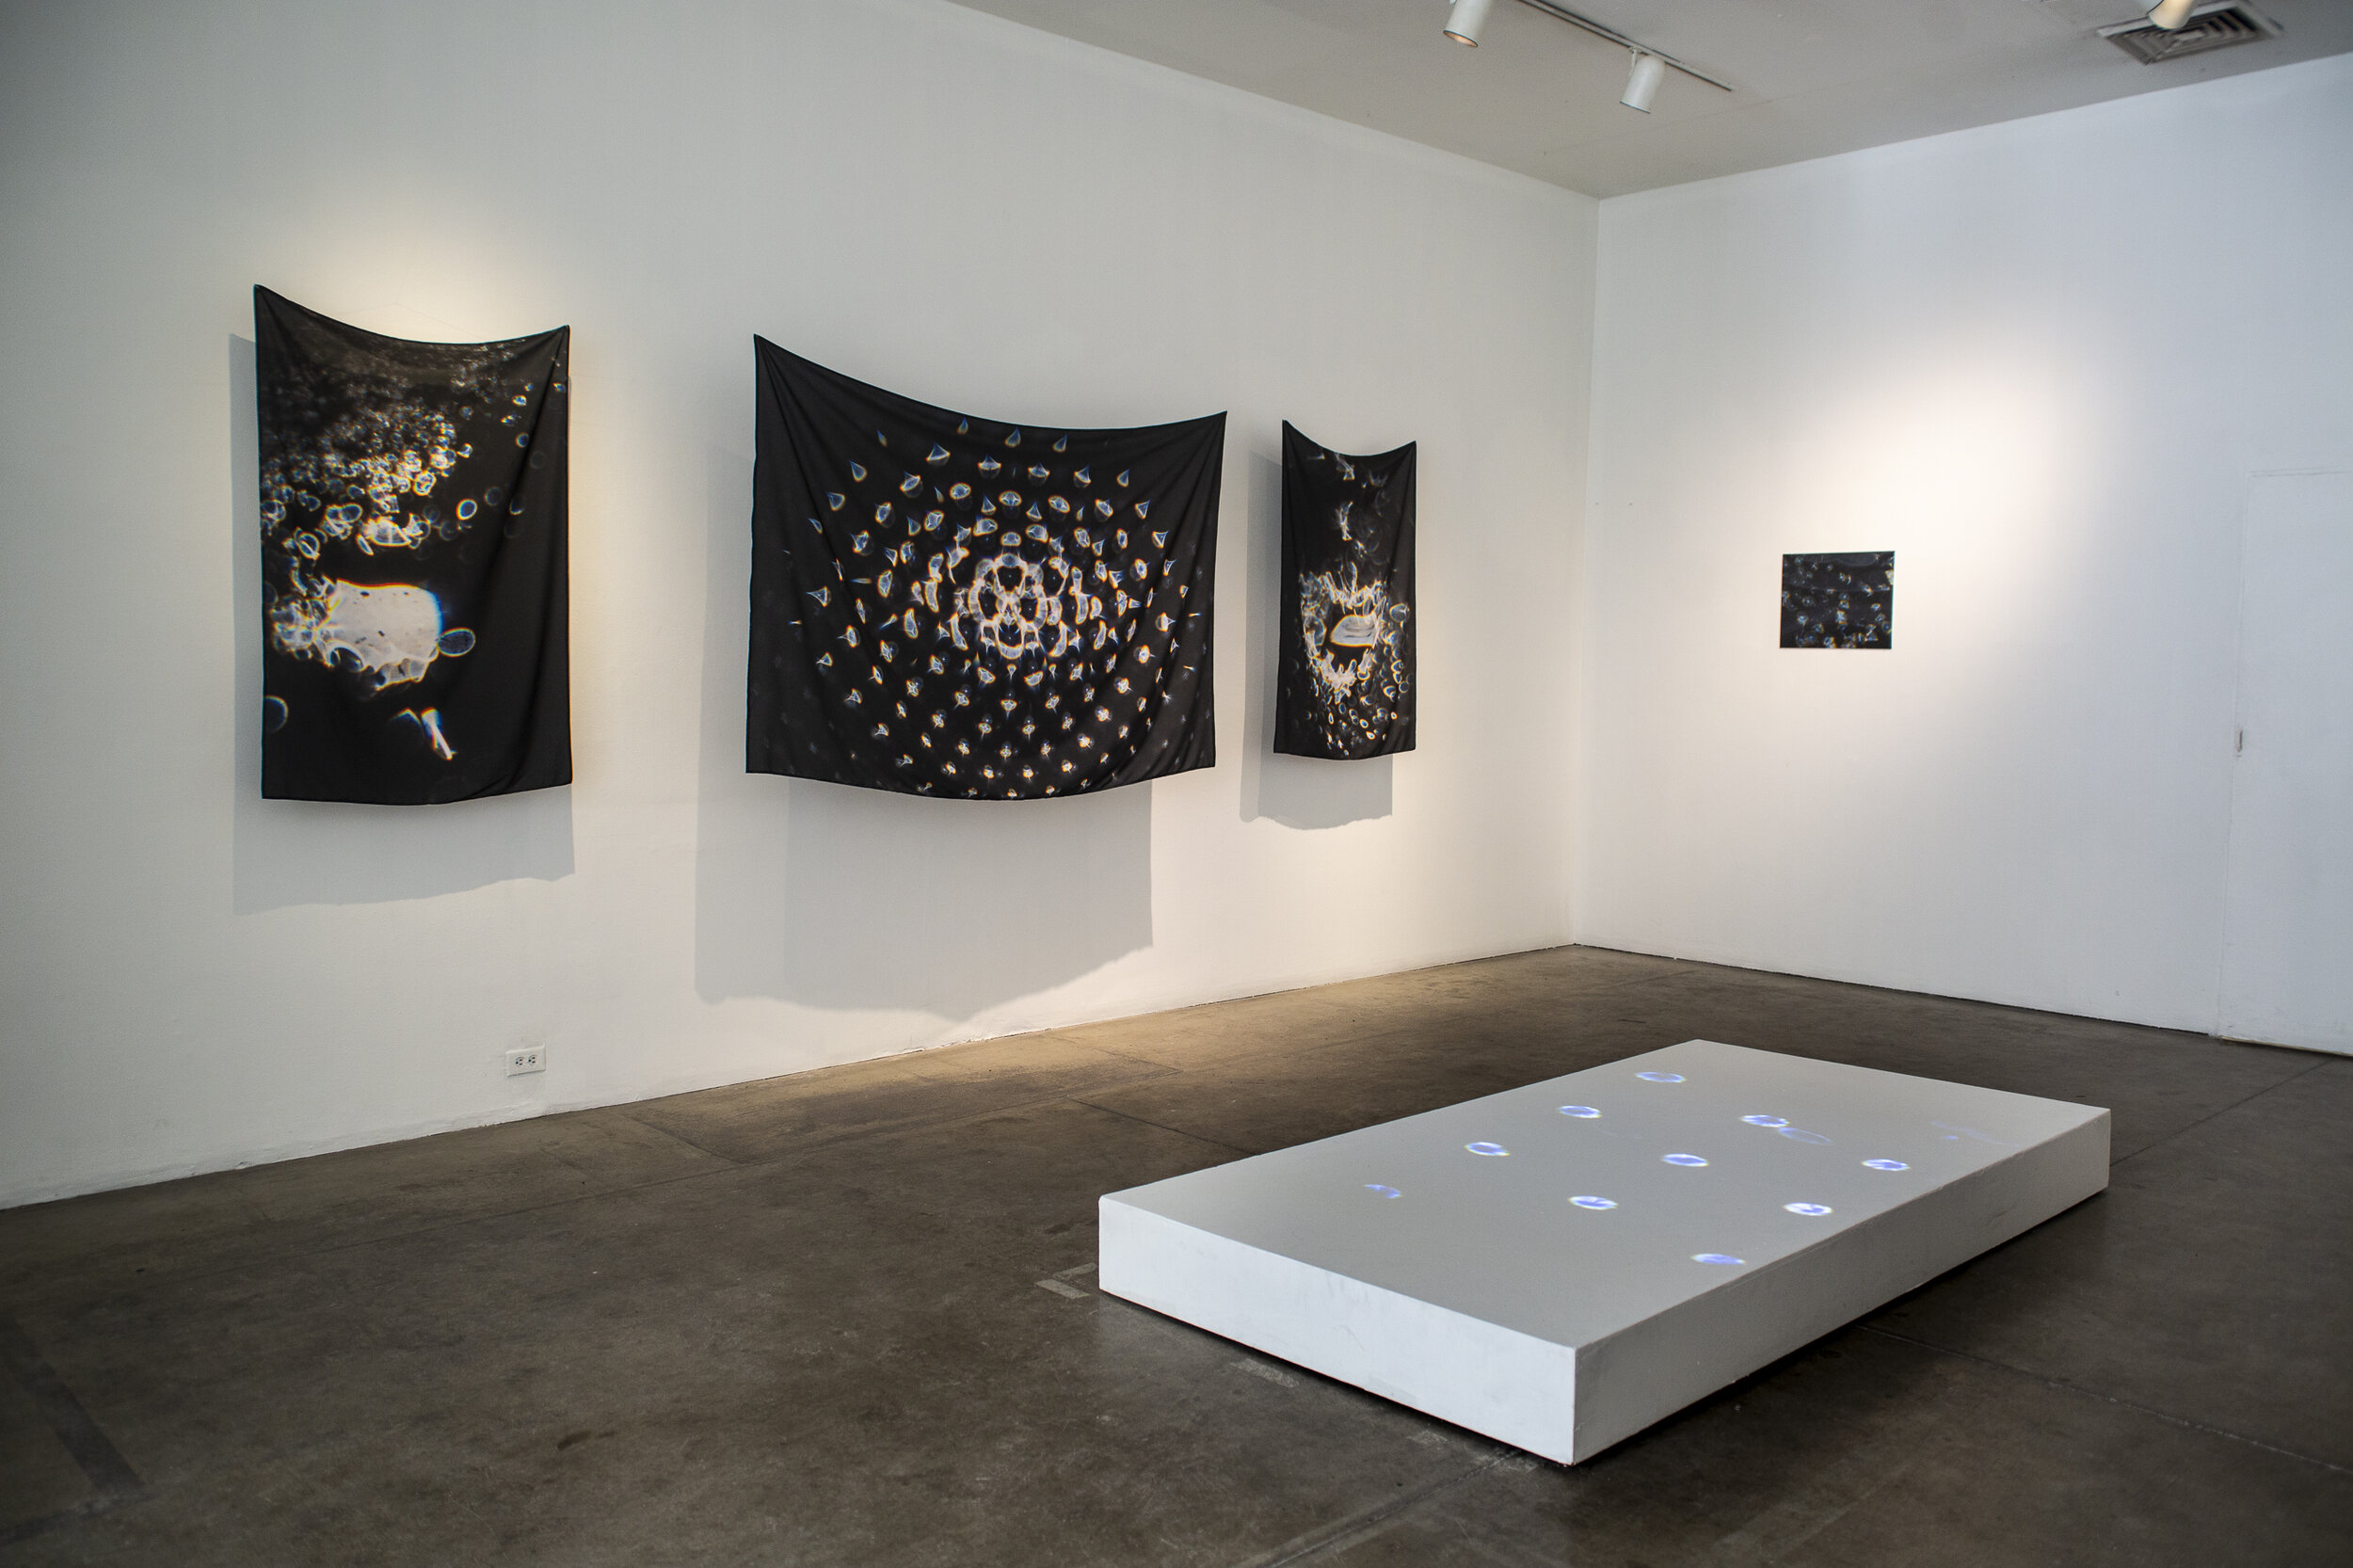  Installation view of  Voids, etc.  exhibition at 707 Gallery, Pittsburgh PA&nbsp;  January 2020    